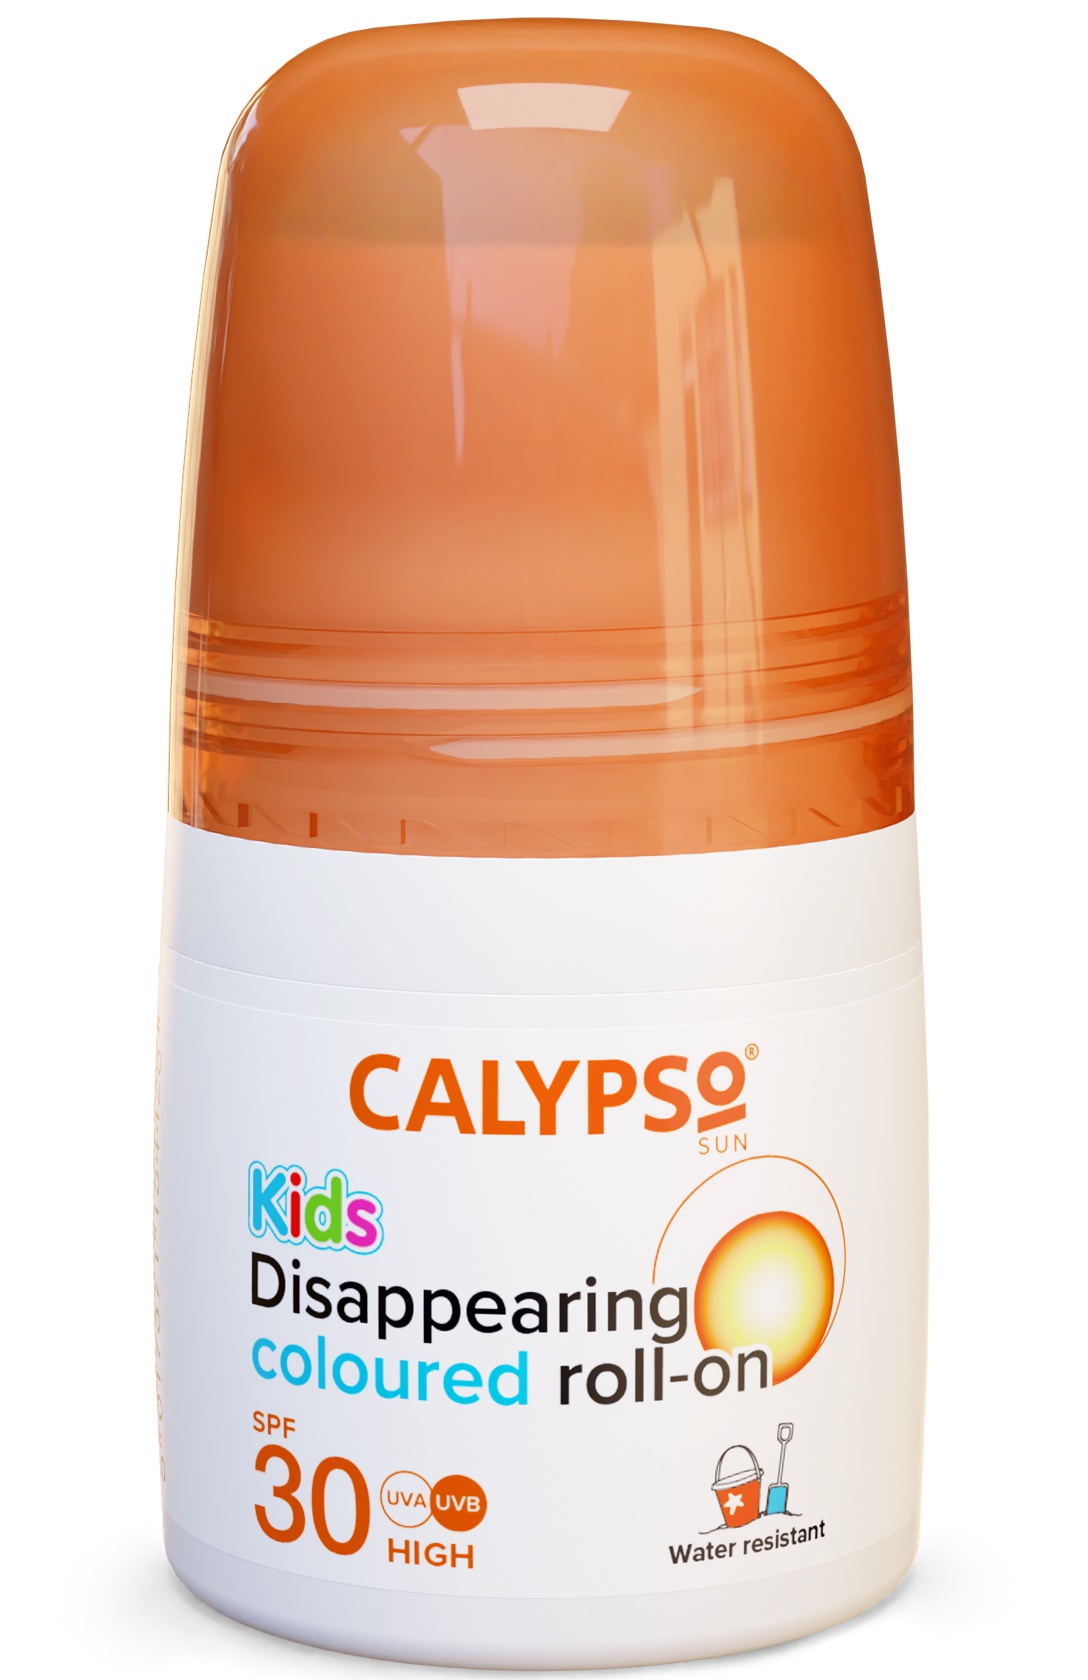 Calypso Disappearing Coloured Roll-on